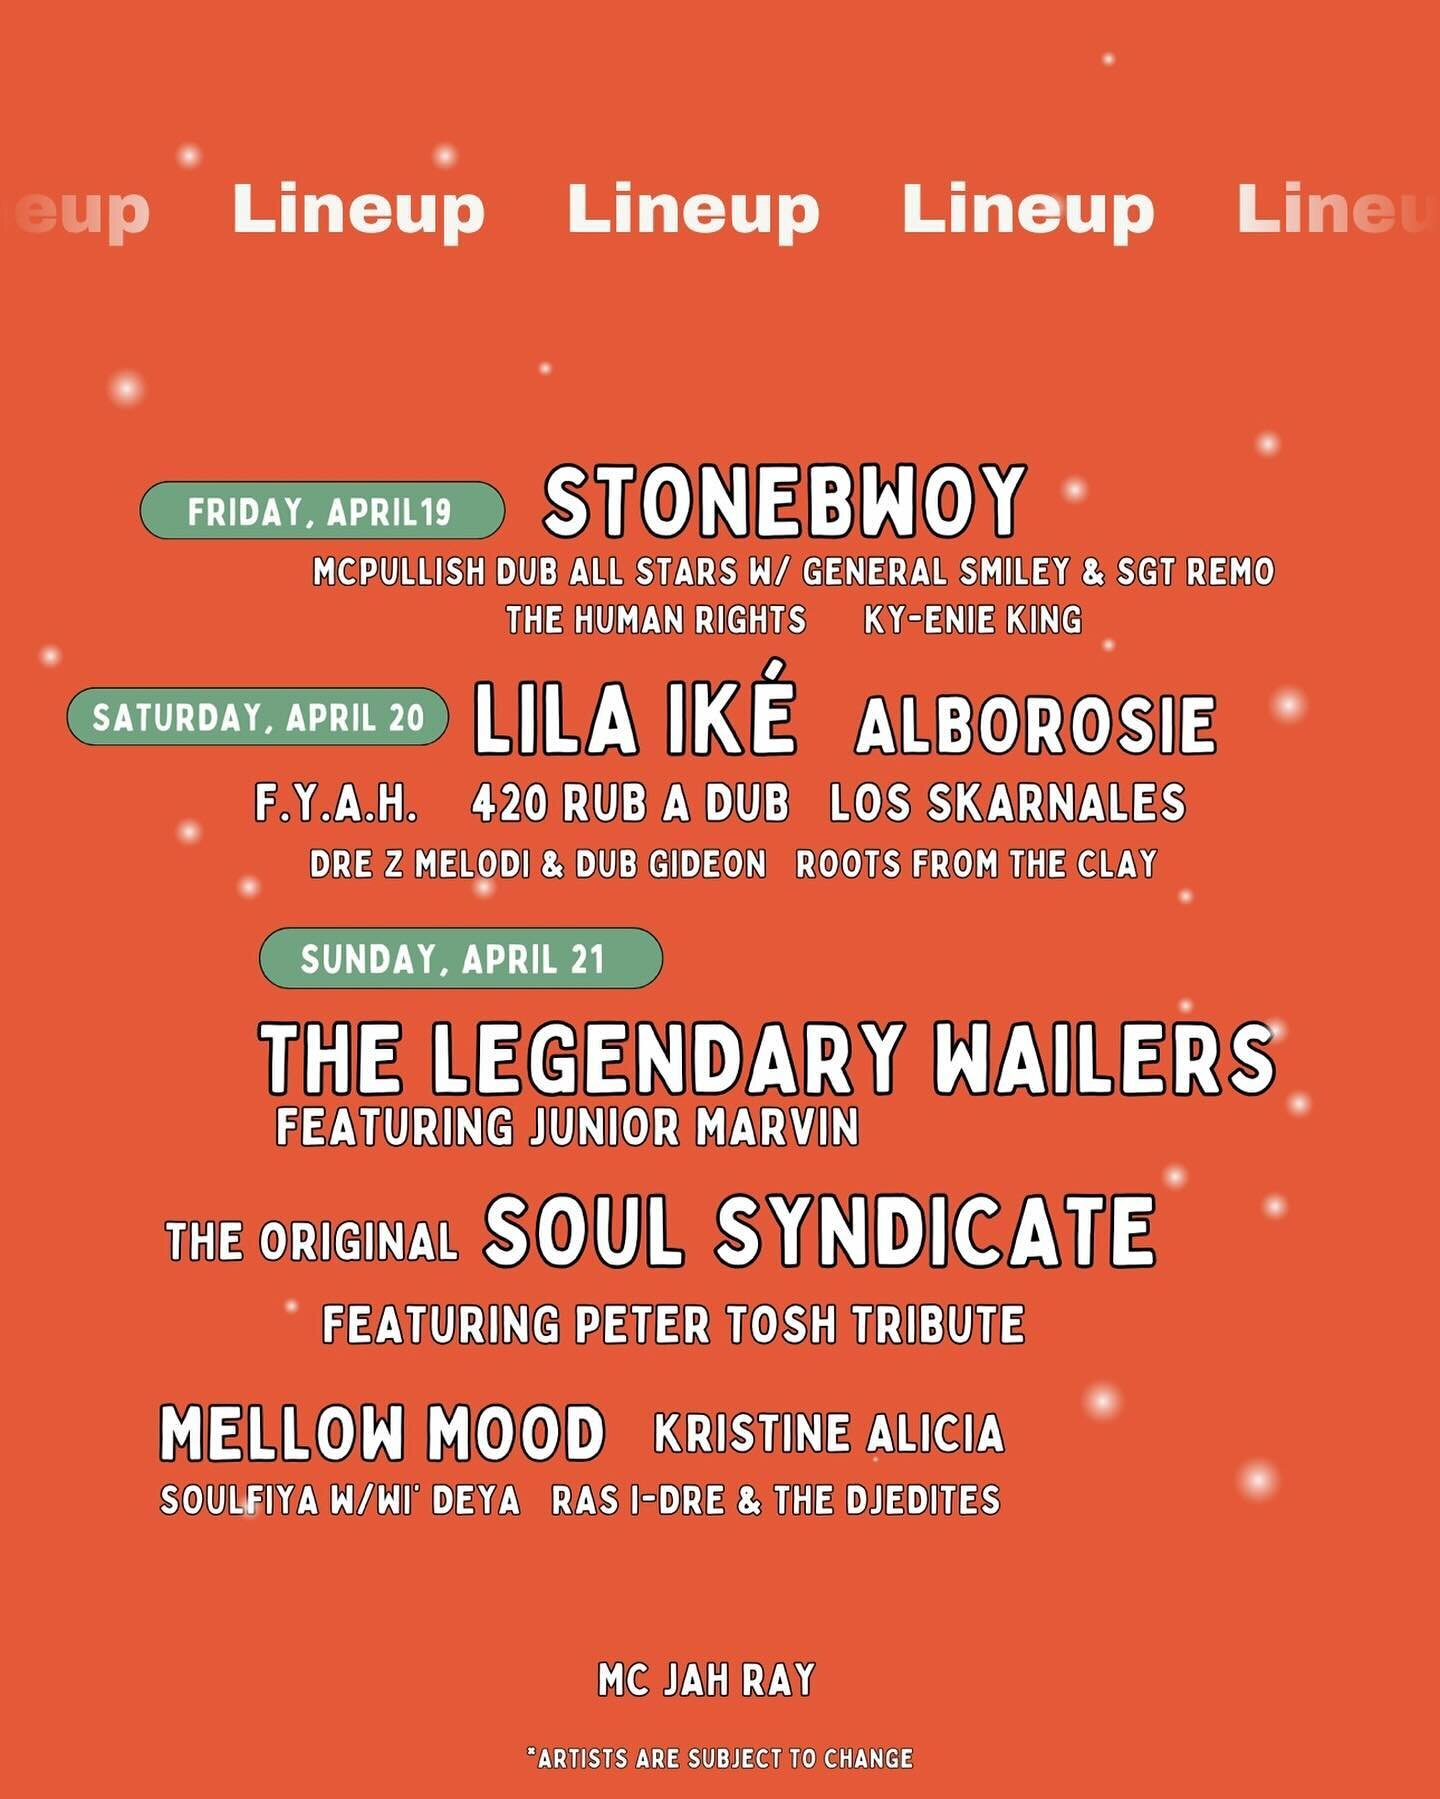 The fabulous AUSTIN REGGAE FEST line-up Aug 19, 20 and 21. Come see why Austin is the Live Music Capital of the World 🌍🎵🤩❤️ Benefiting the Capital City Food Bank @lloydstanbury  @sista_irie @austinreggaefestival @capitalcityfoodbank #totheroots #A